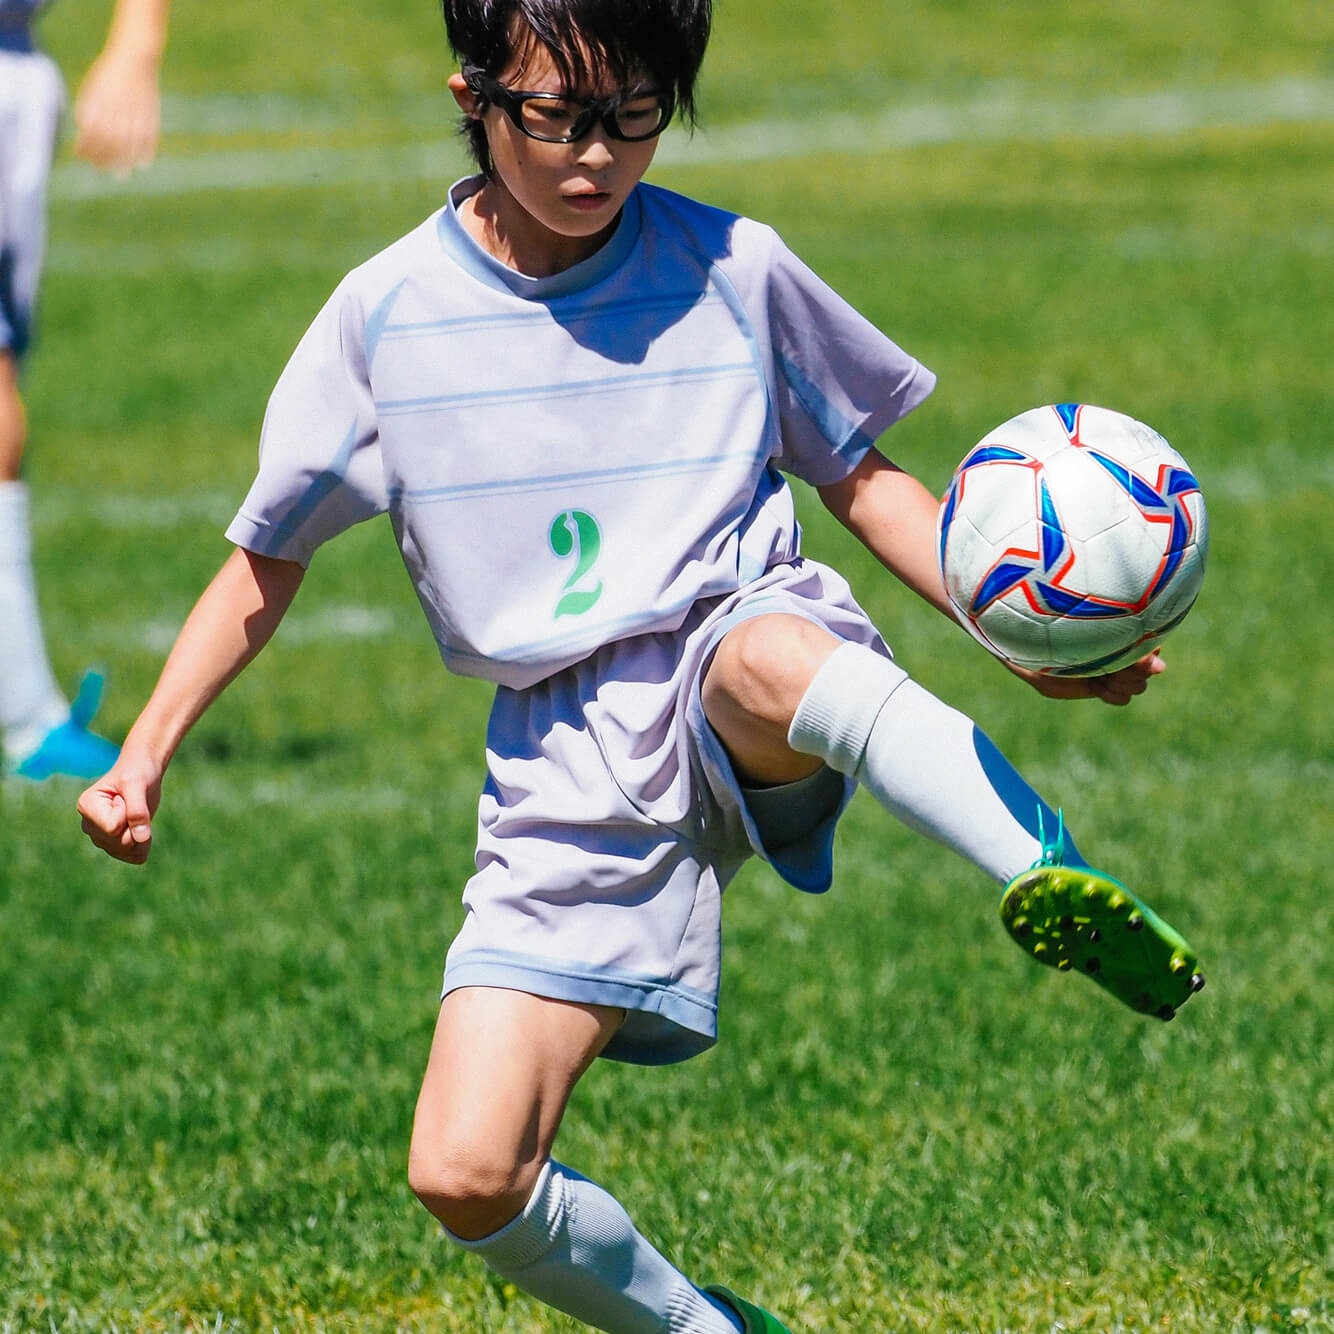 Eye injuries can be prevented if you wear protective glasses or specially designed sports goggles.